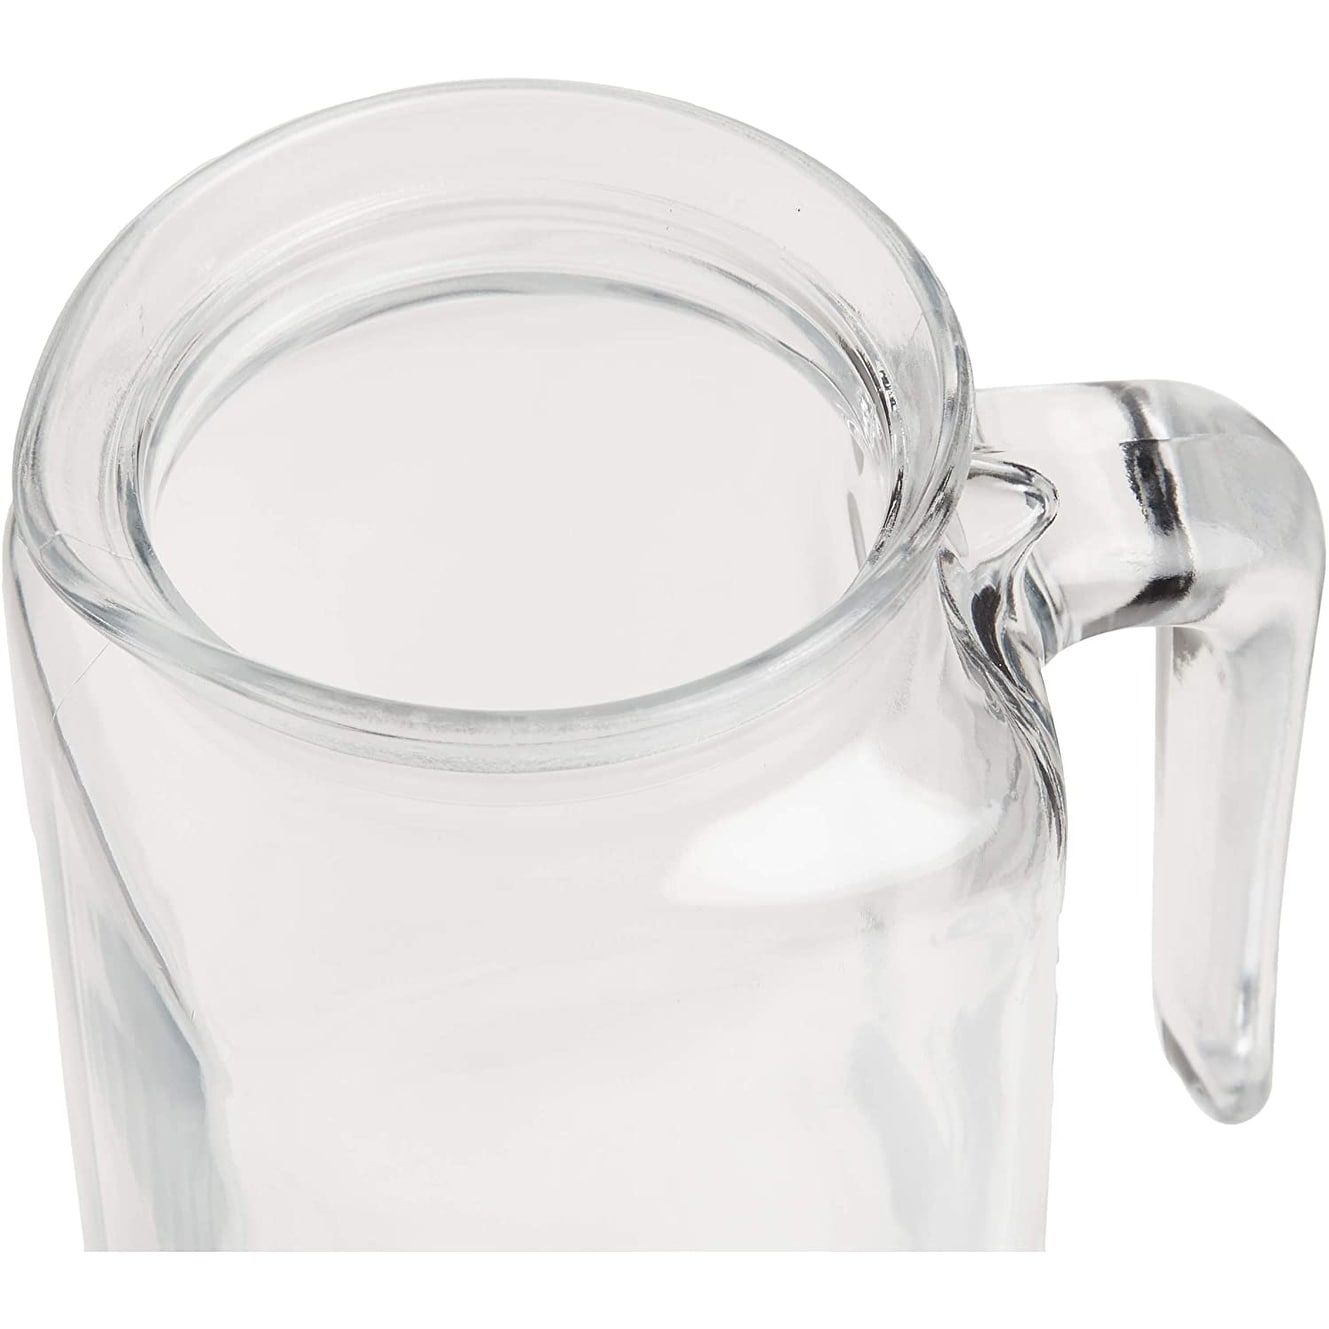 https://ak1.ostkcdn.com/images/products/is/images/direct/40e93a4ca5ffc2ace1f2f903c9c37df48614d6bb/Bormioli-Rocco-Glass-Frigoverre-Jug-With-Airtight-Lid%2C-Set-of-2.jpg